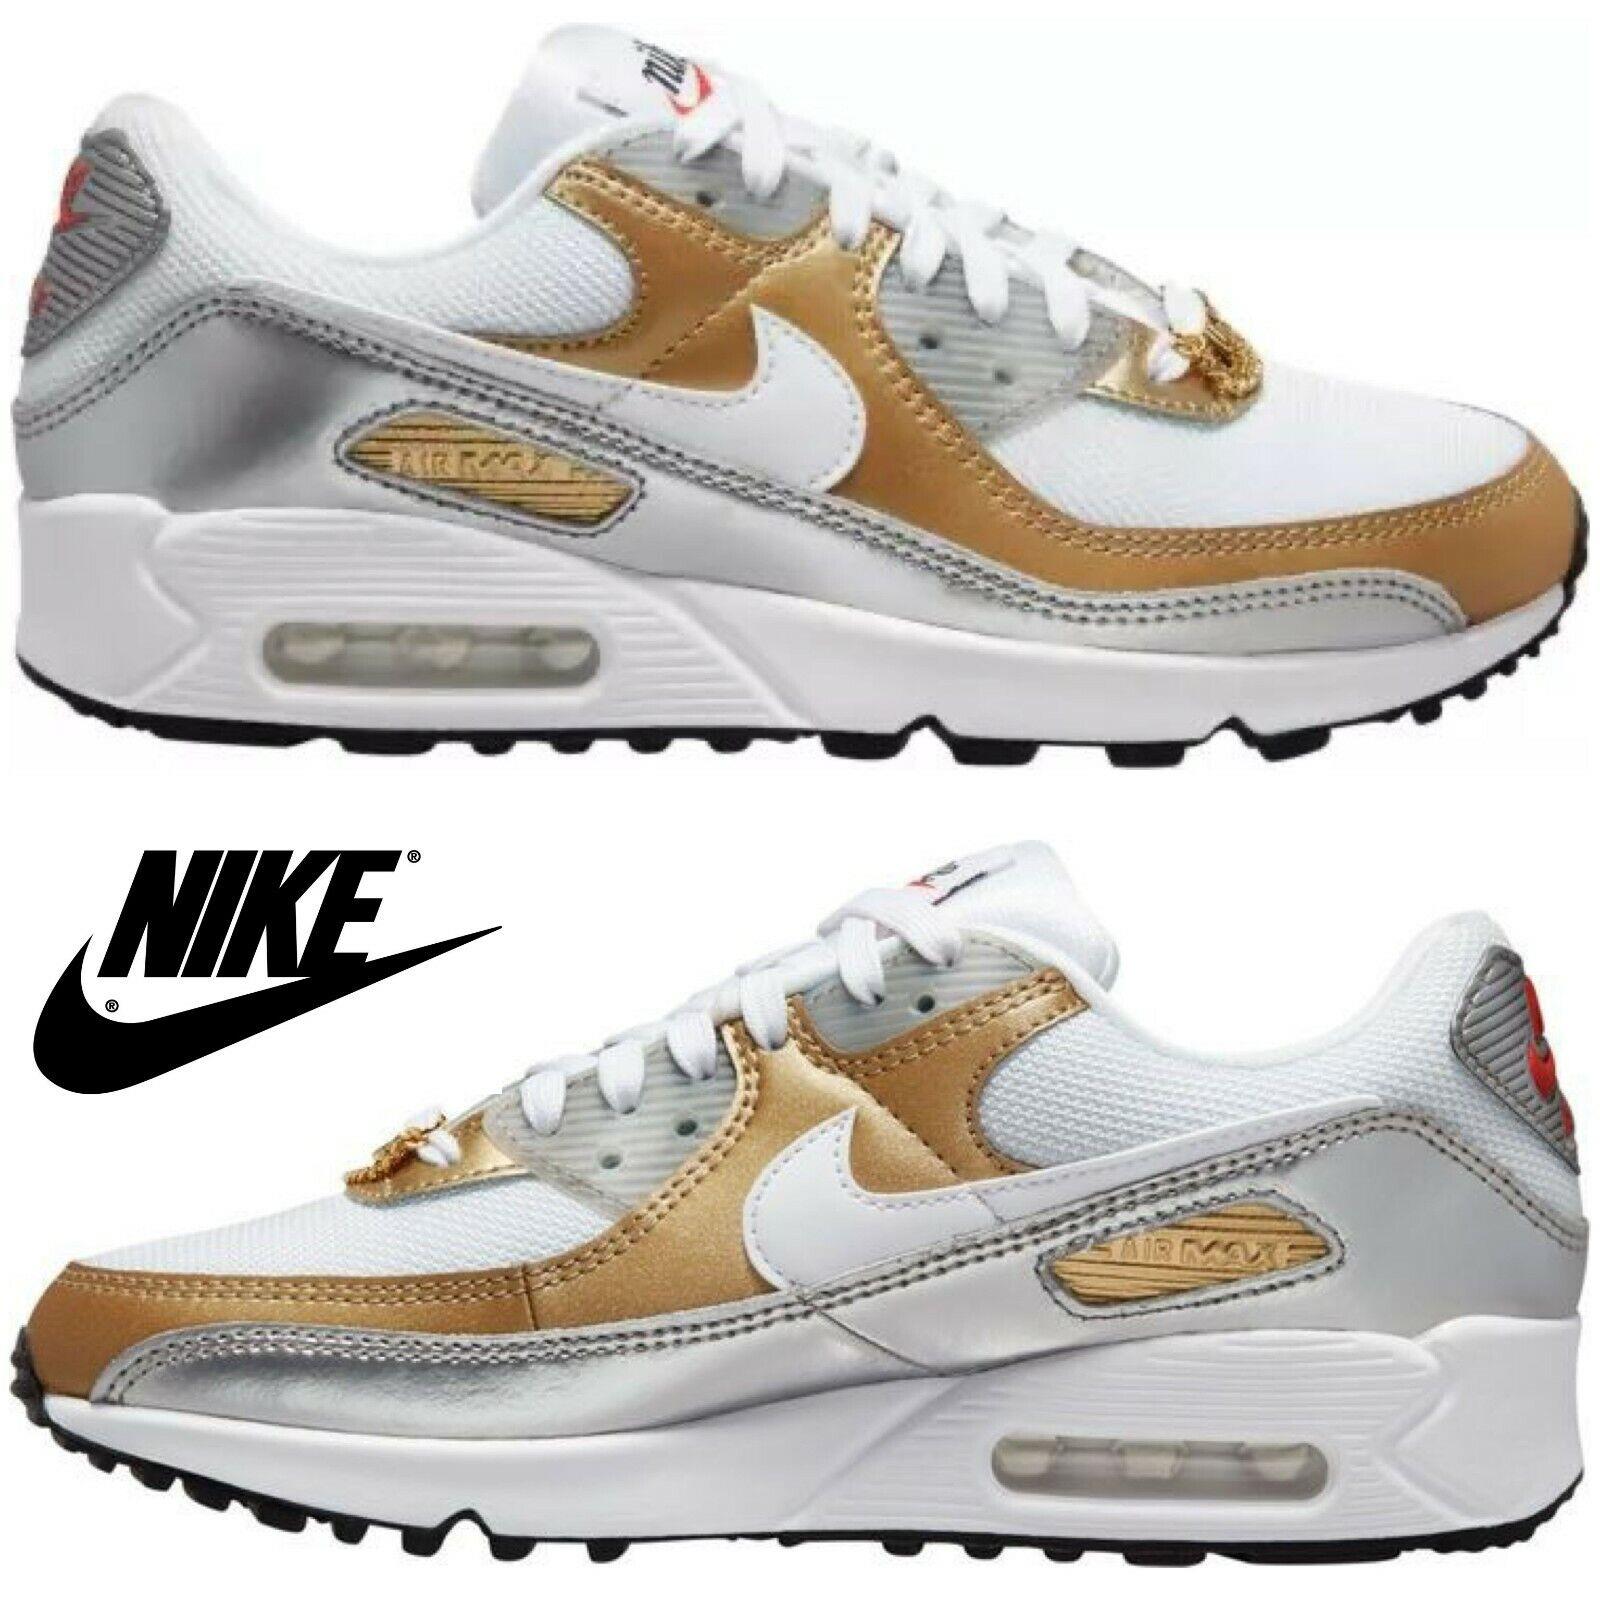 Nike Air Max 90 Women s Sneakers Casual Shoes Premium Running Sport Gold White